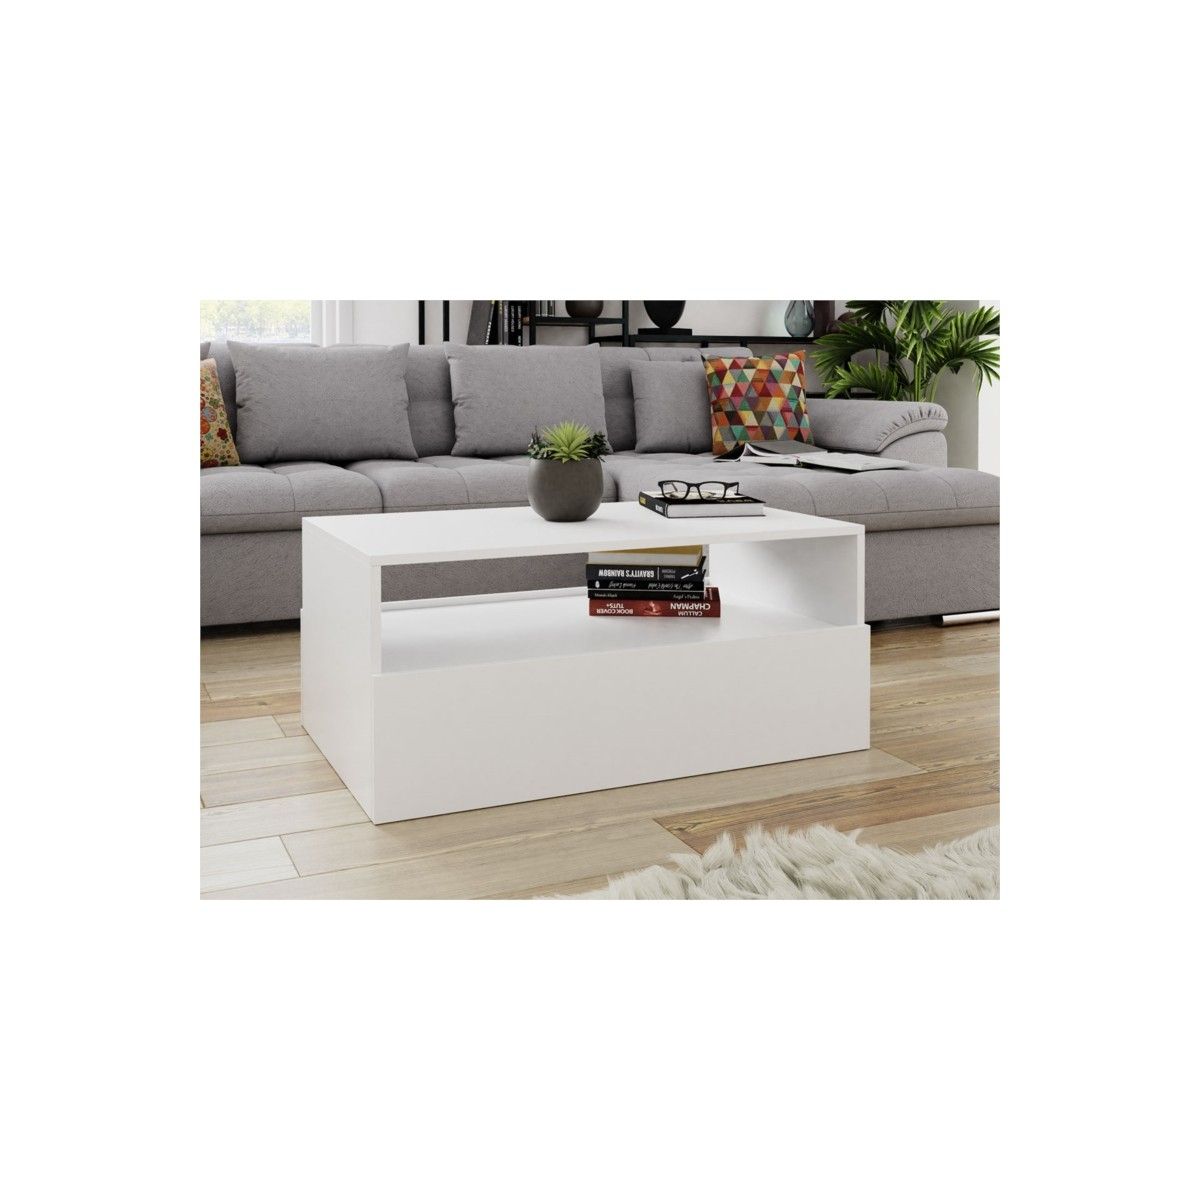 Coffee Table 2 Drawers 90 Cm Drek (white) – Amp Story 8929 Inside 2 Drawer Coffee Tables (View 4 of 15)